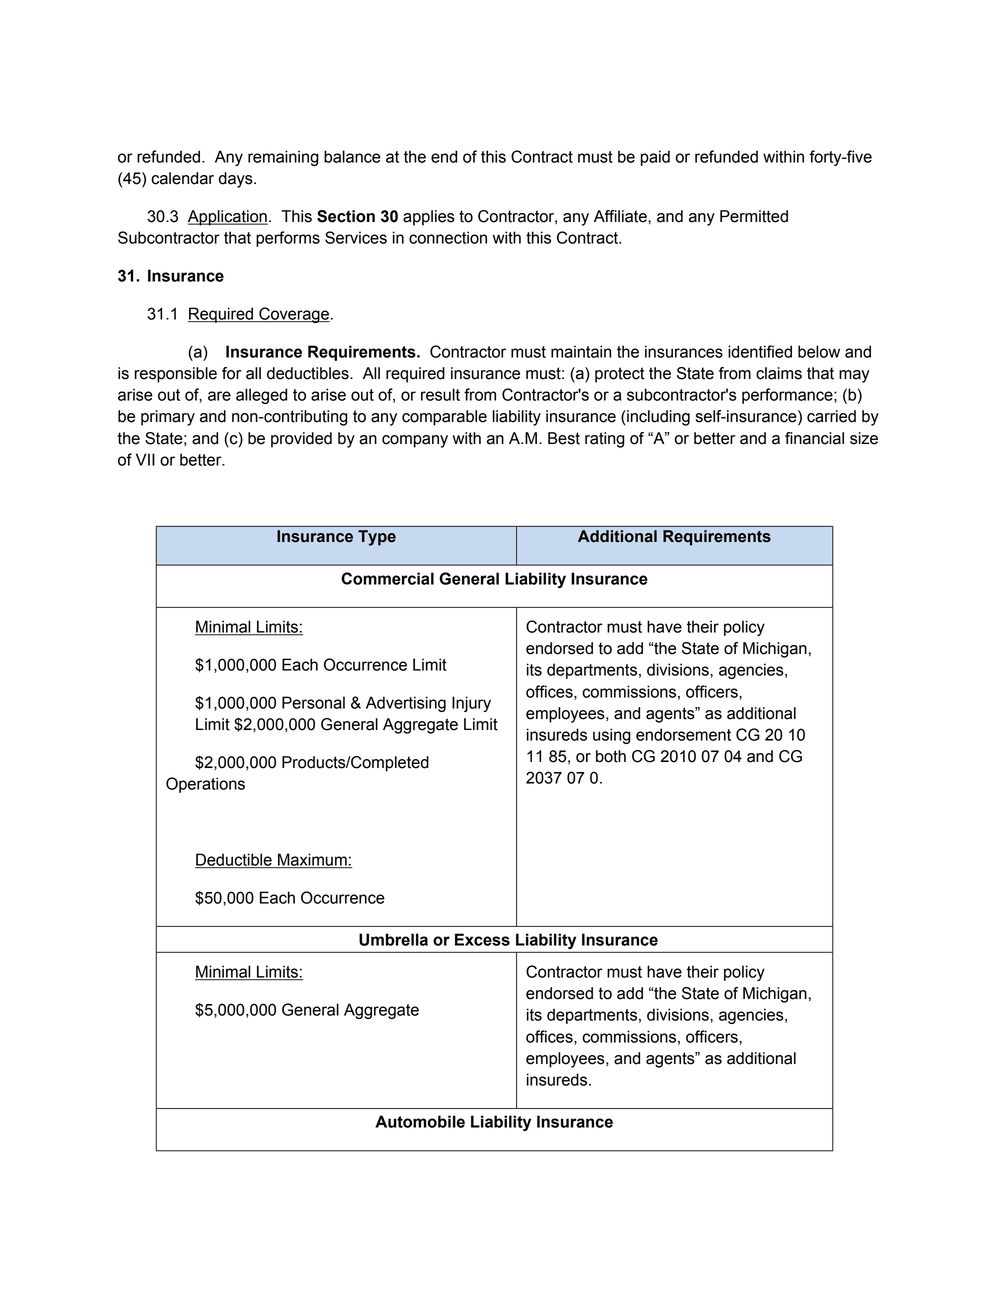 Page 31 from State of Michigan 2020 Kaseware contract